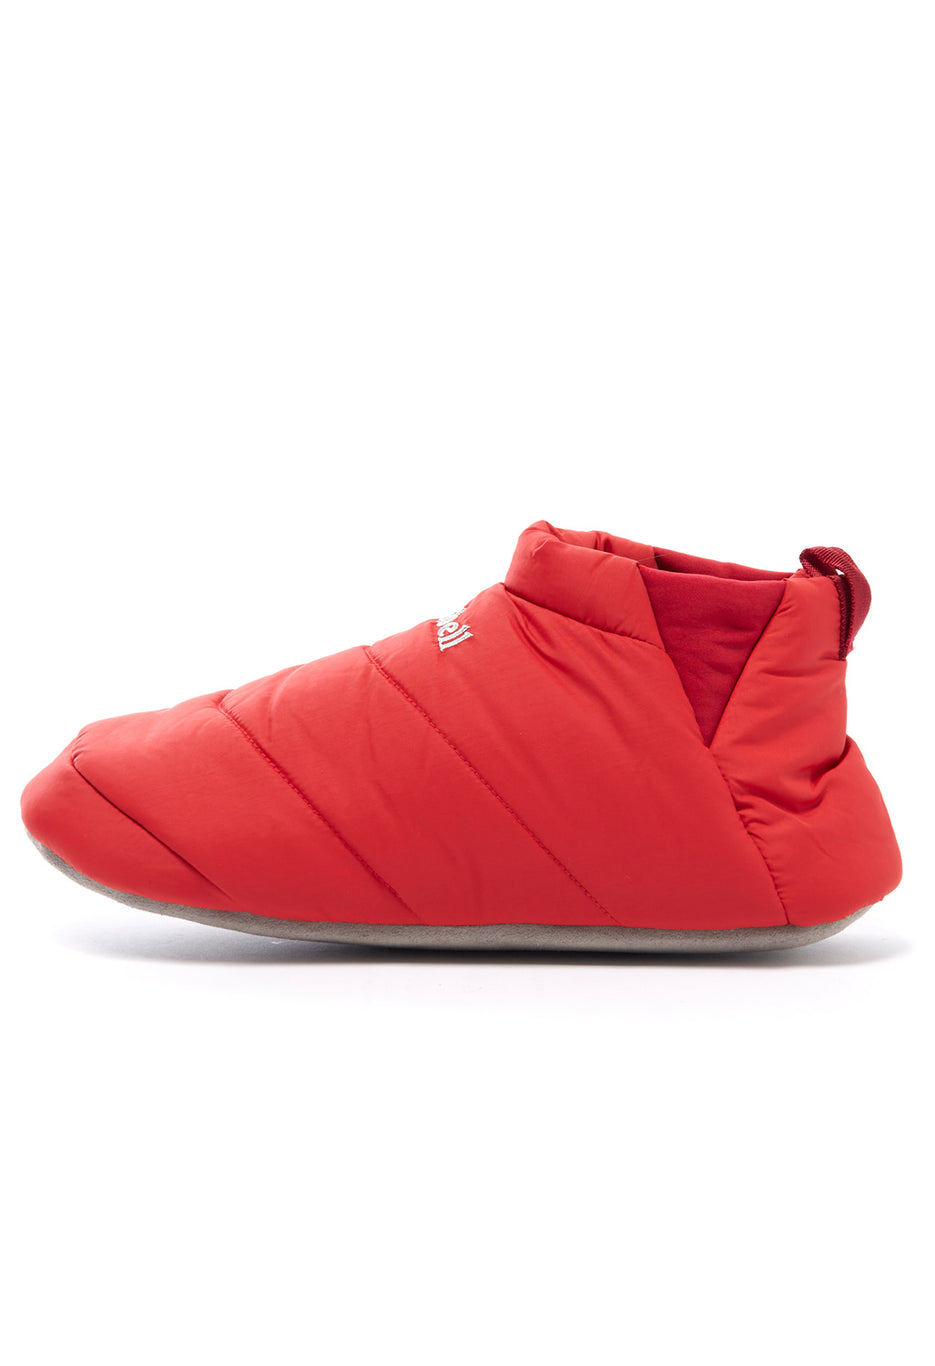 Montbell Exceloft Camp Shoes - Red